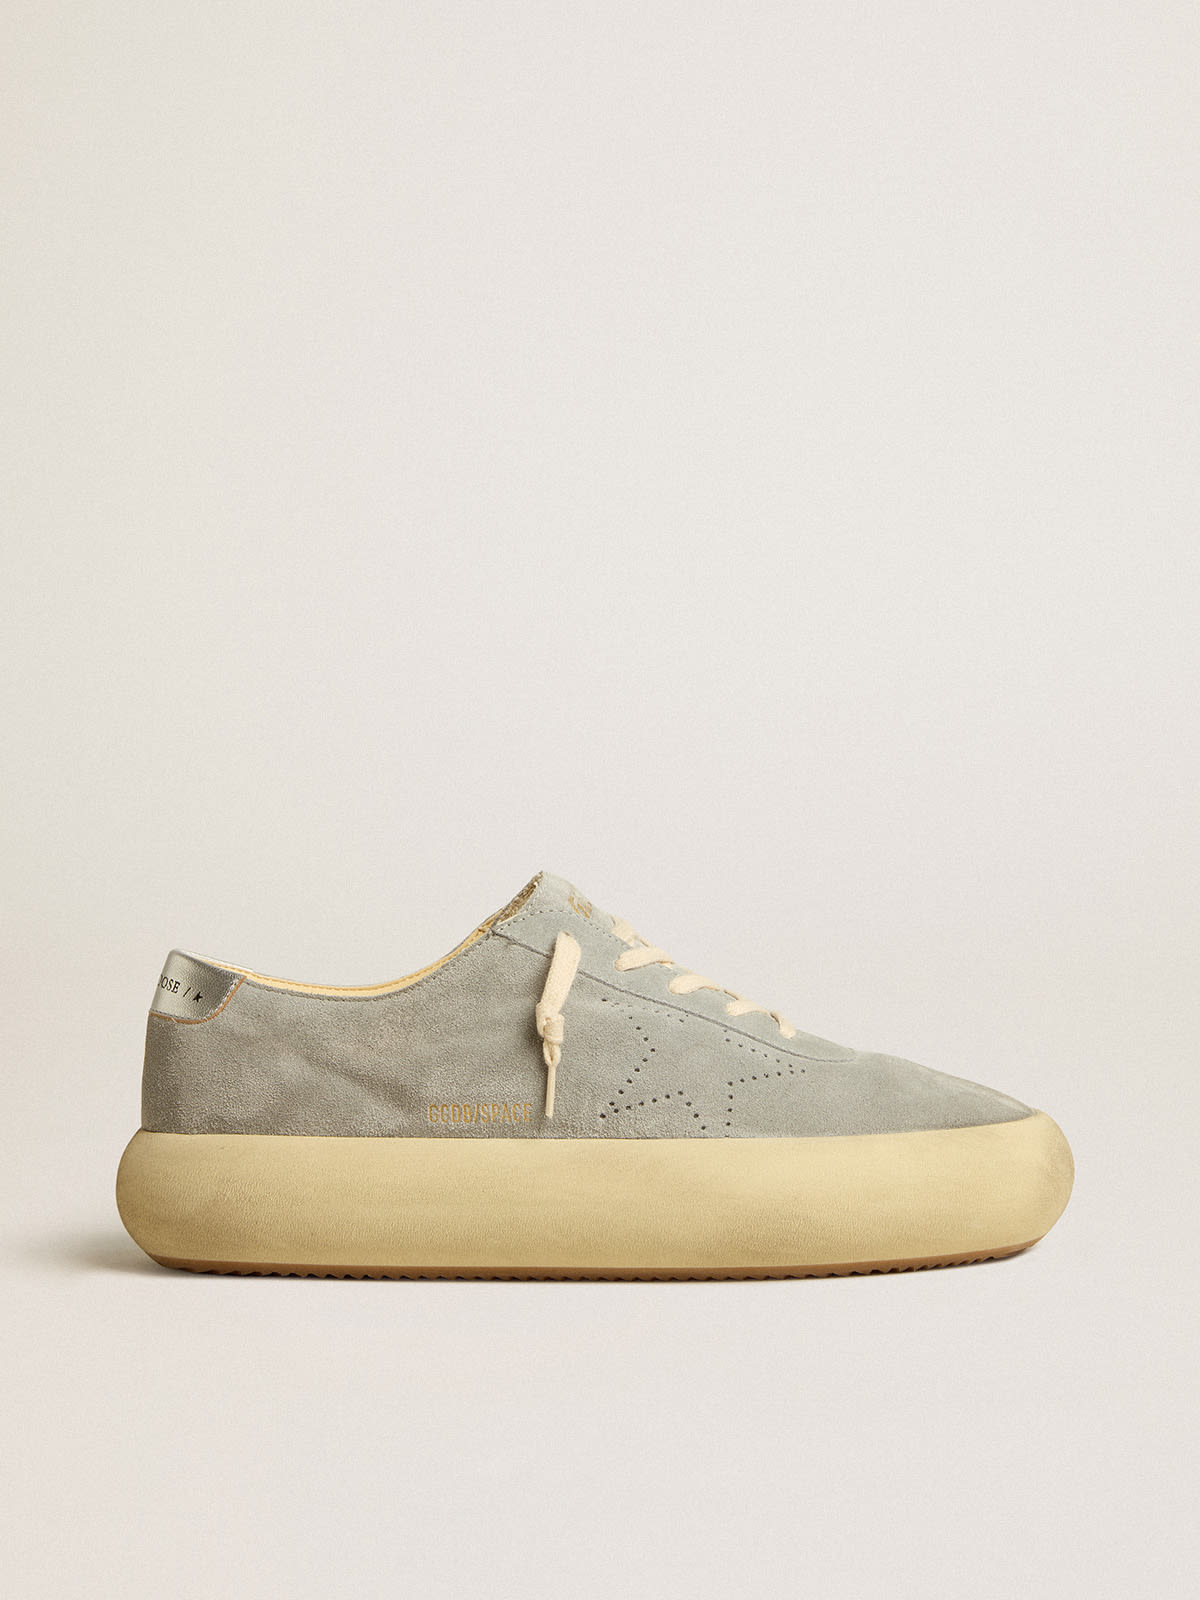 Golden Goose - Men's Space-Star shoes in ice-gray suede with perforated star in 